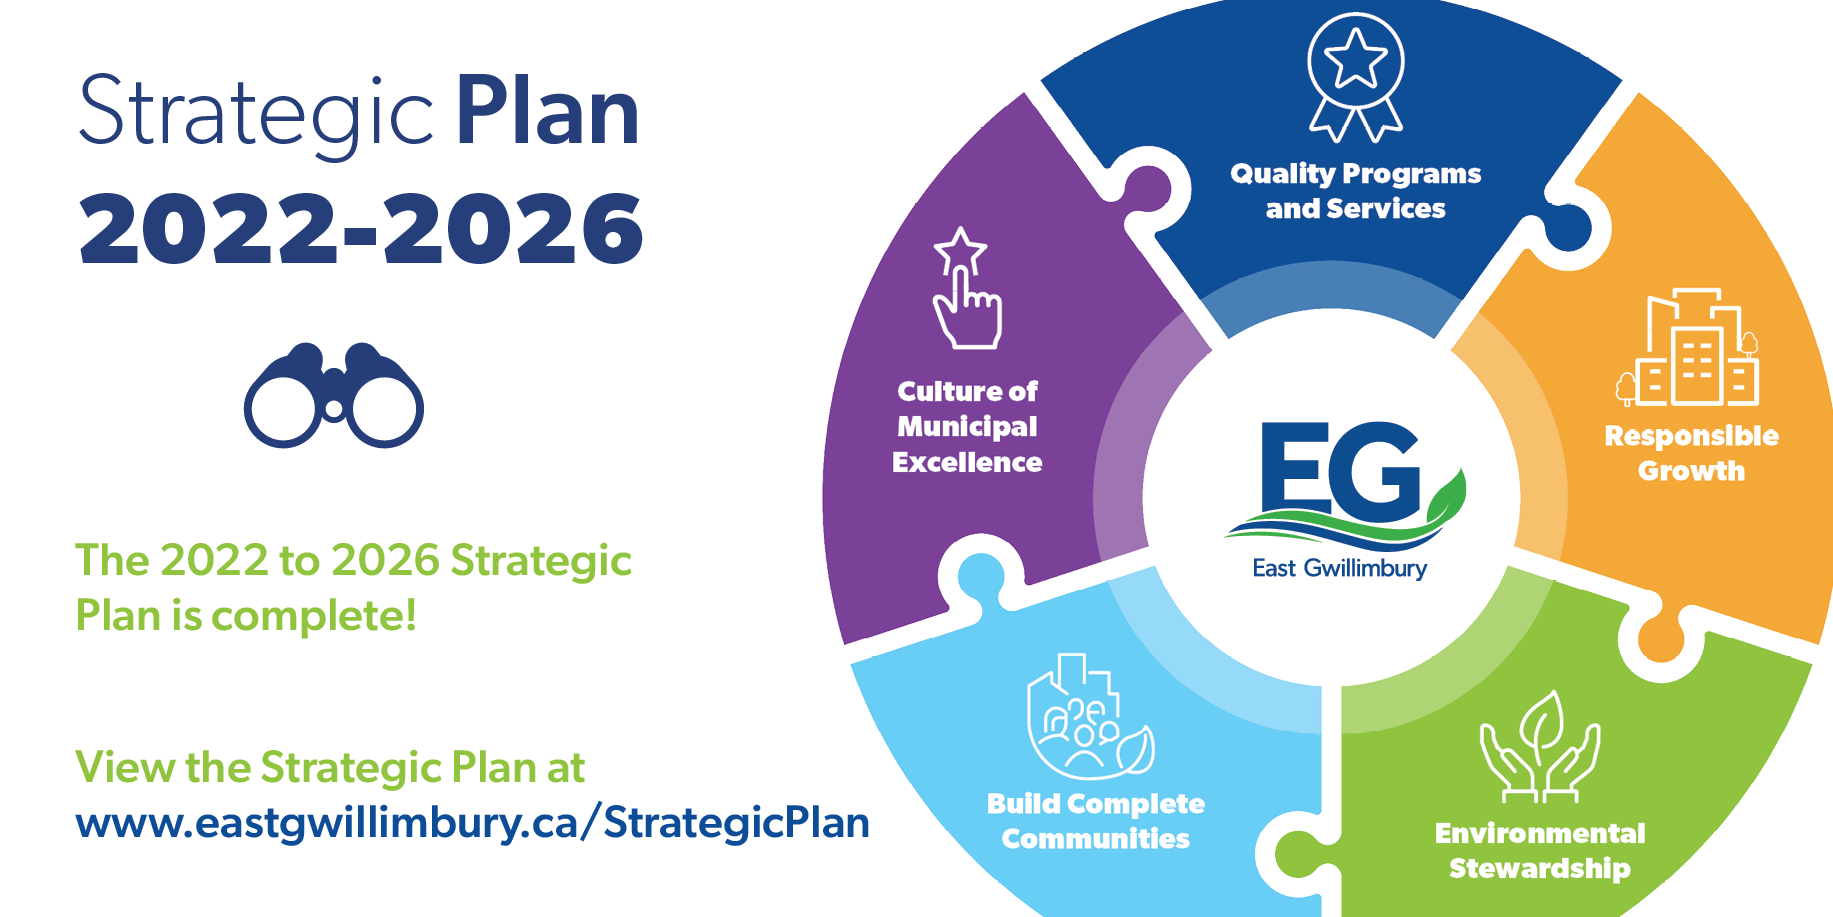 East Gwillimbury's 2022 to 2026 Strategic Plan is approved